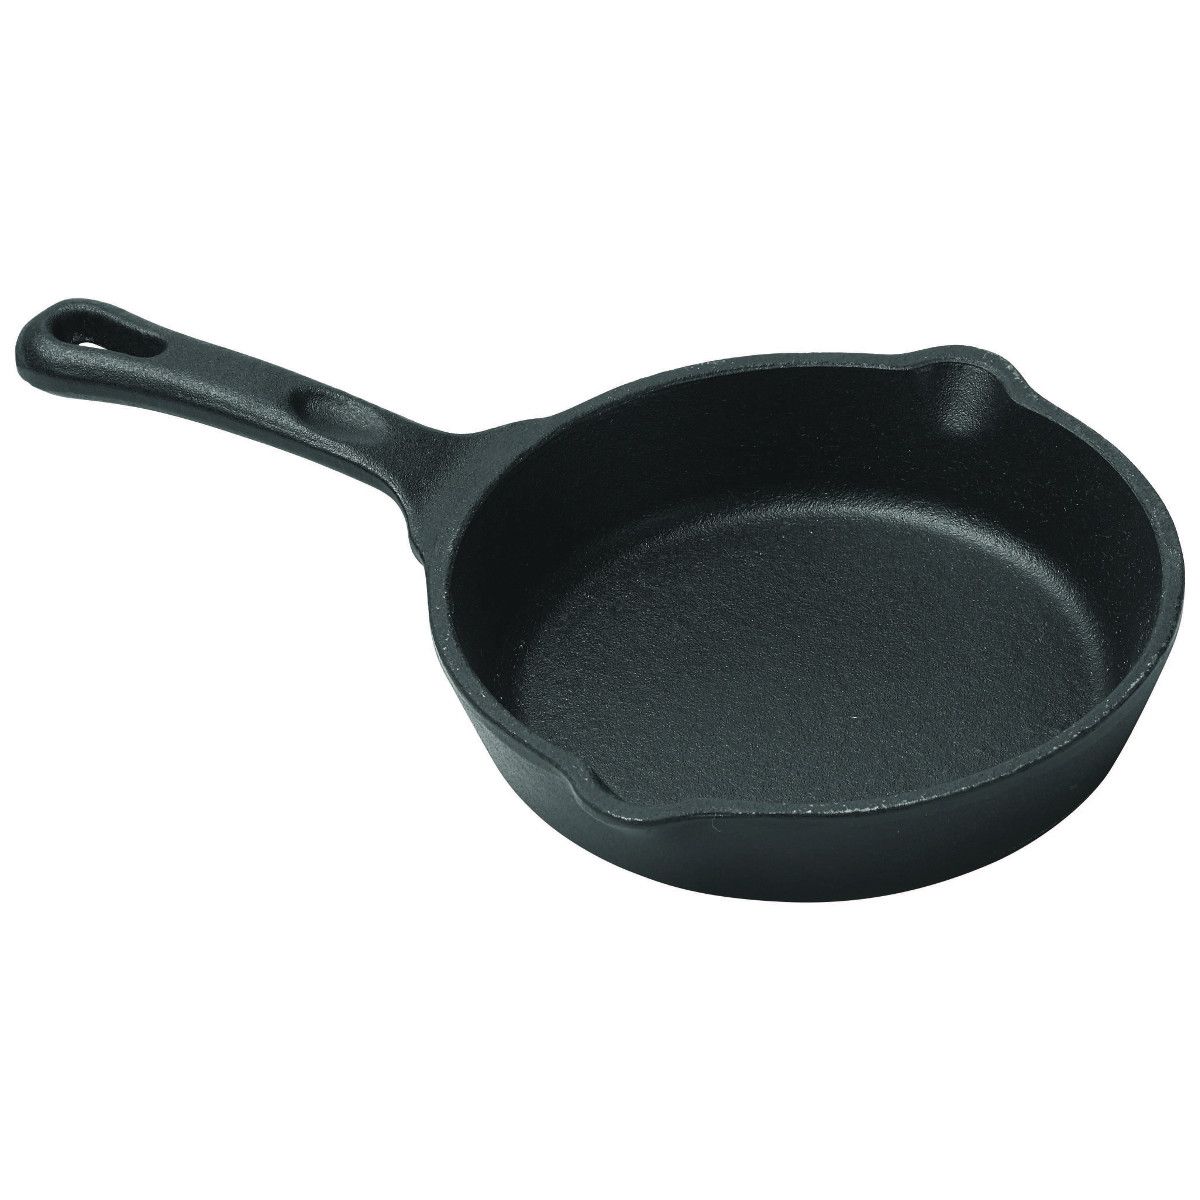 2019-1 5 Inch Cast Iron Skillet Small Frying Cooking Pan Black